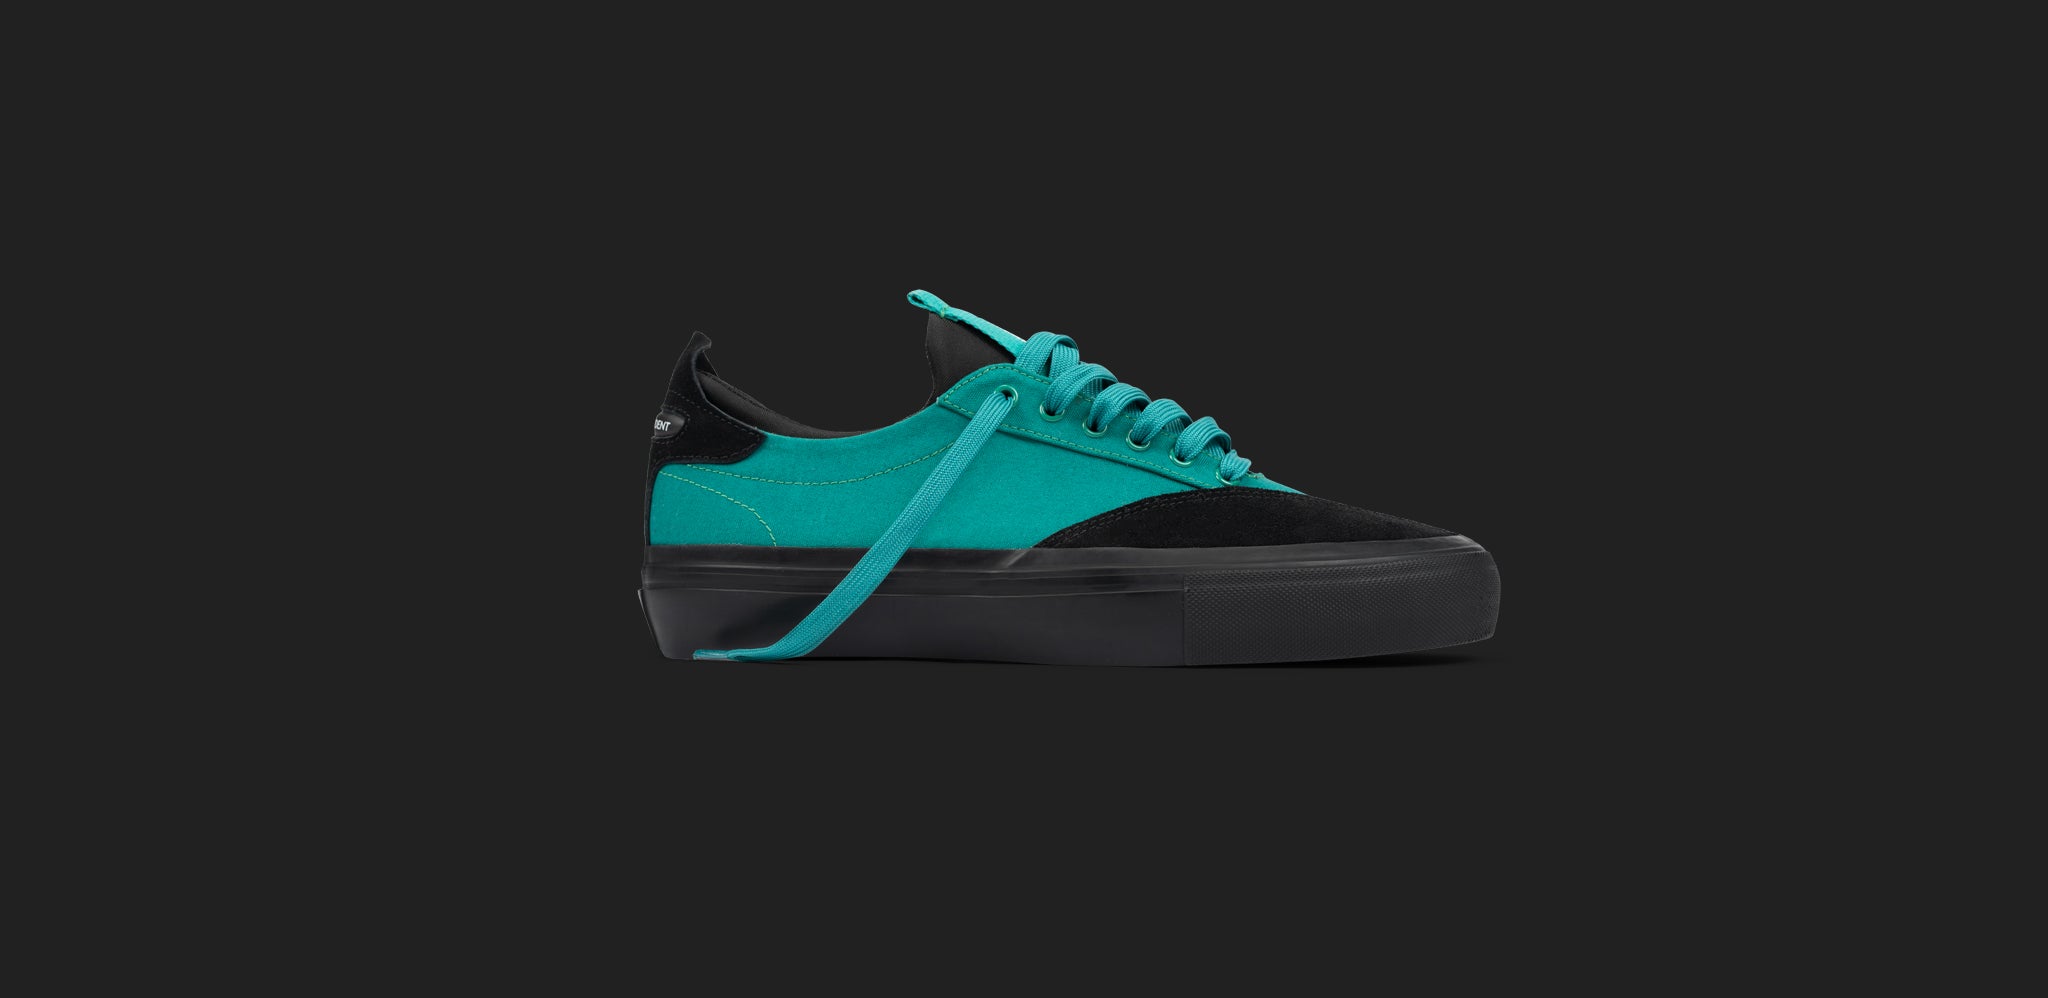 New Colorway of the Knox Releases: Black/Teal